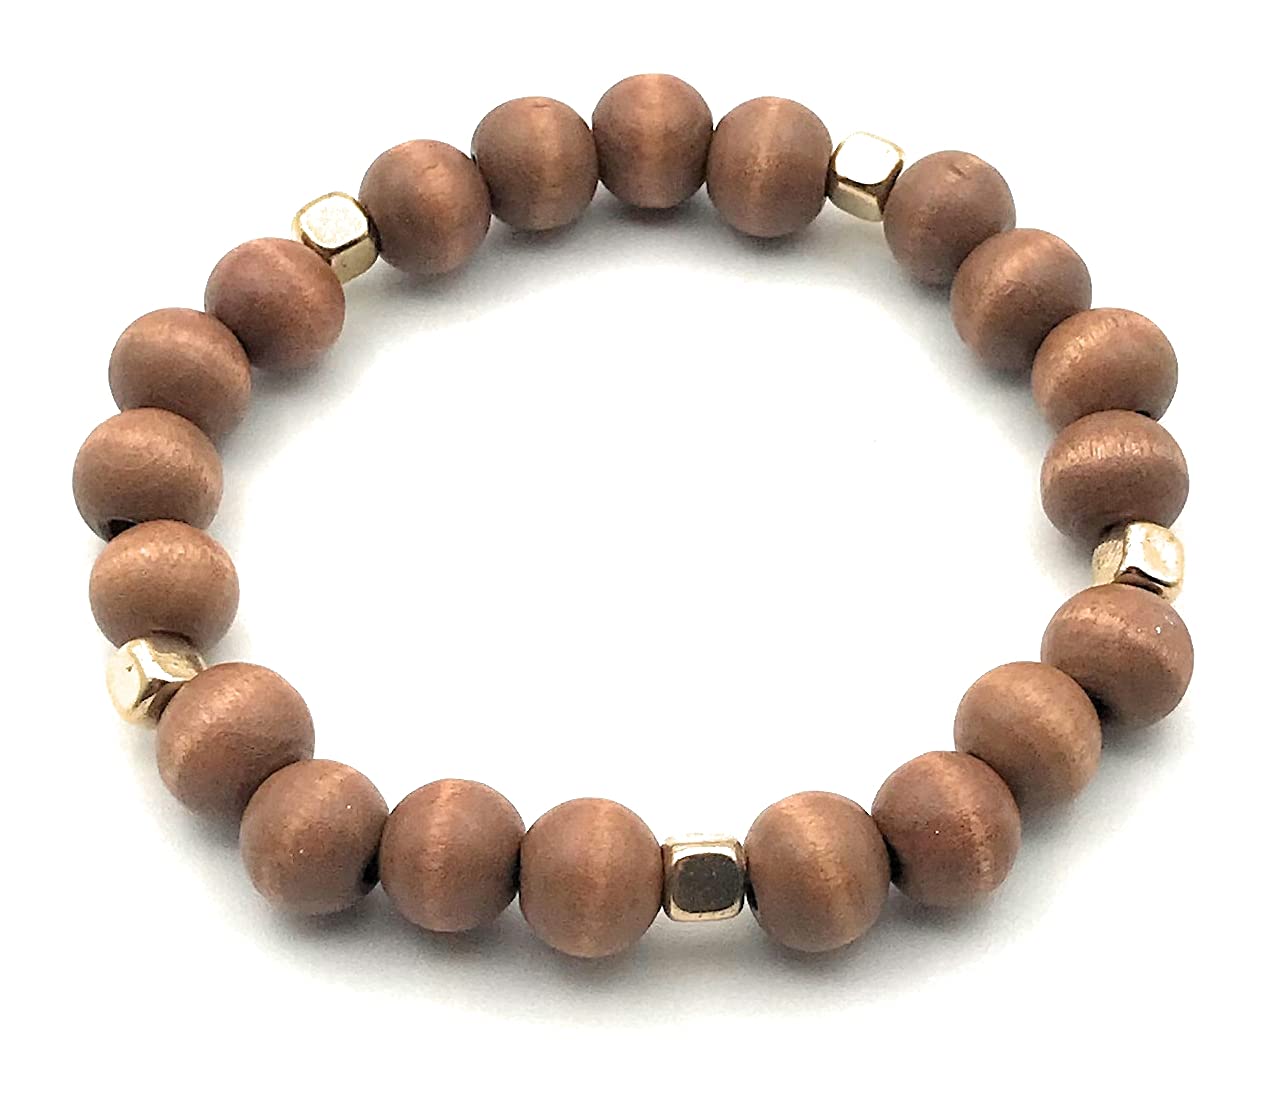 Brown and Gold Color Wooden Stretch Bracelet from Scott D Jewelry Designs